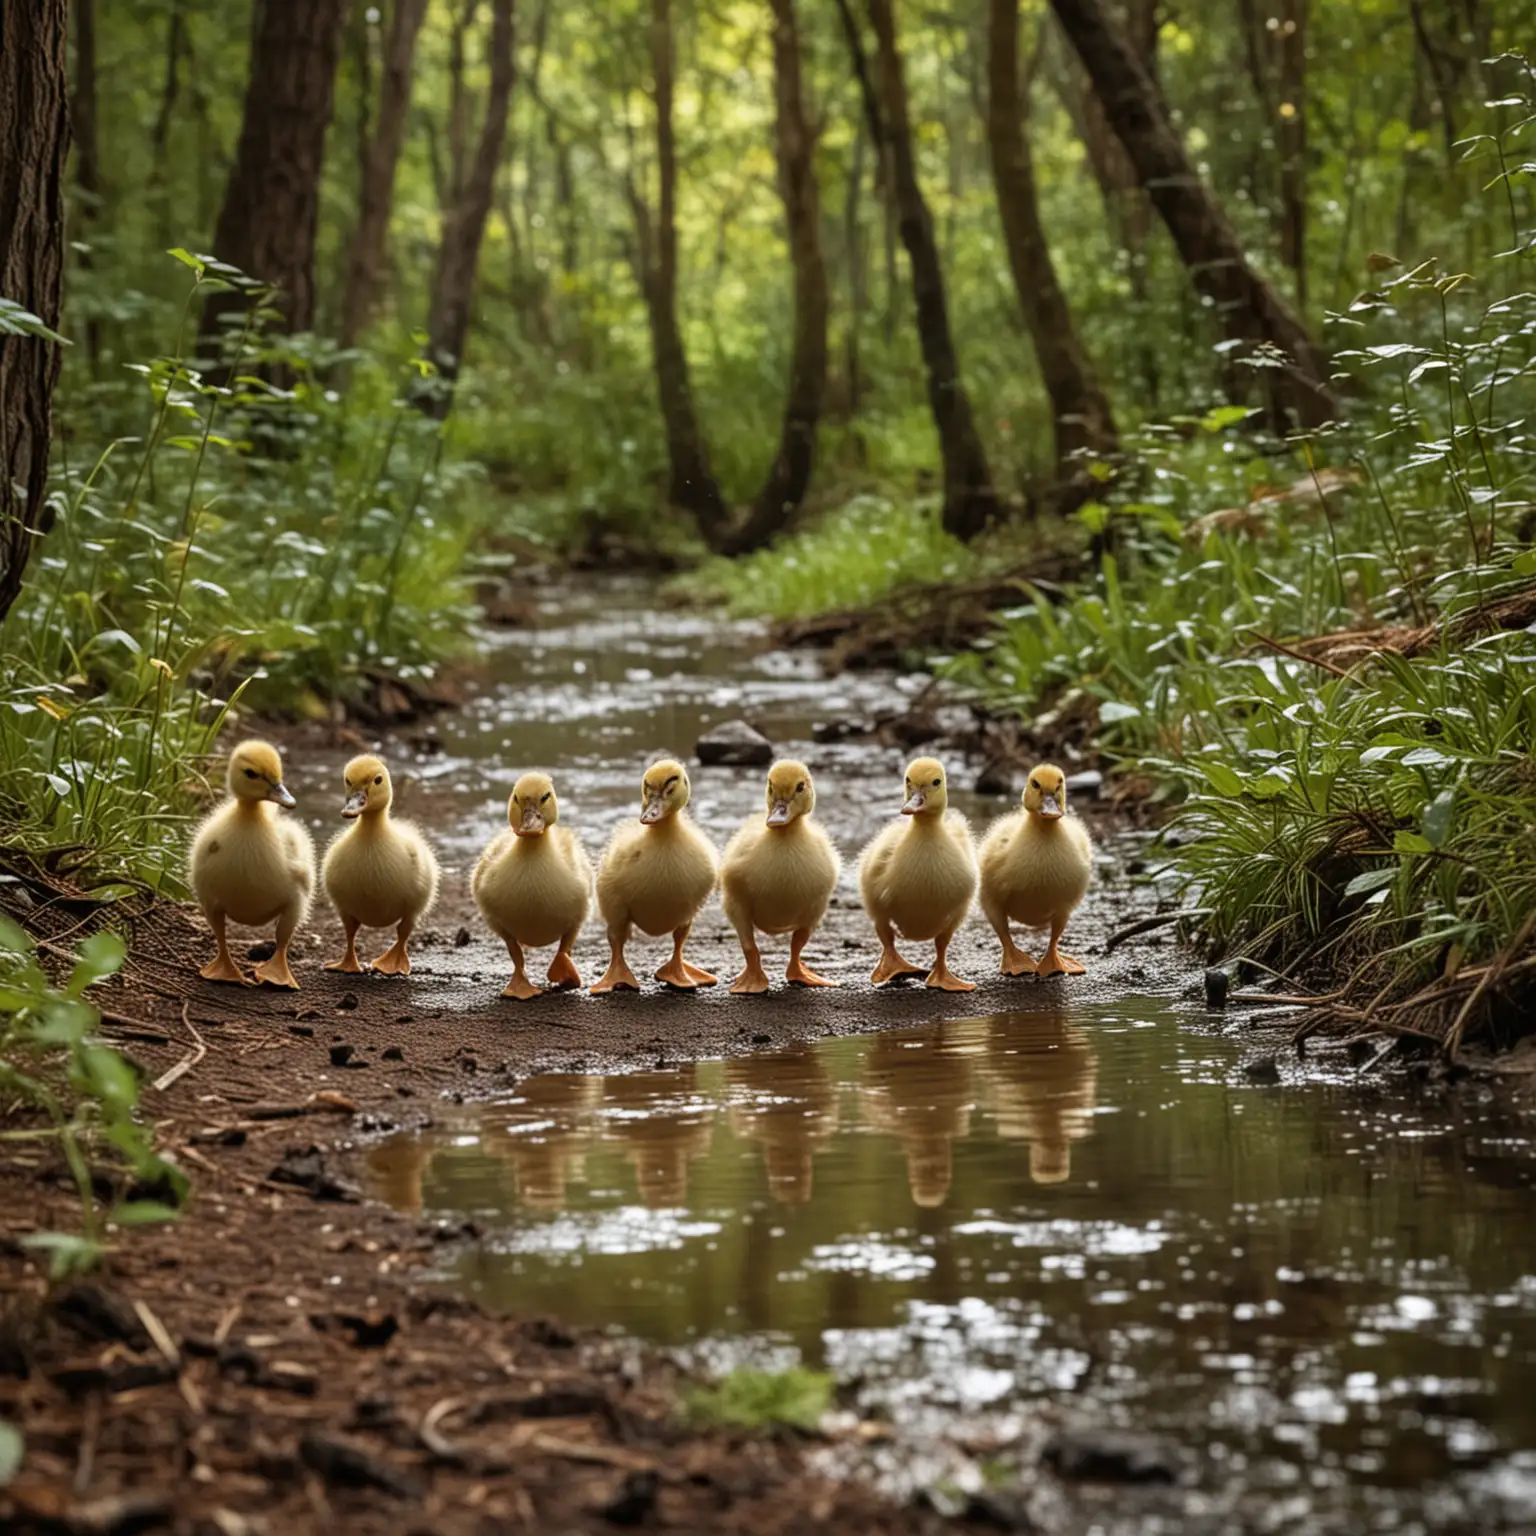 six baby ducks walking through a forest down to a river